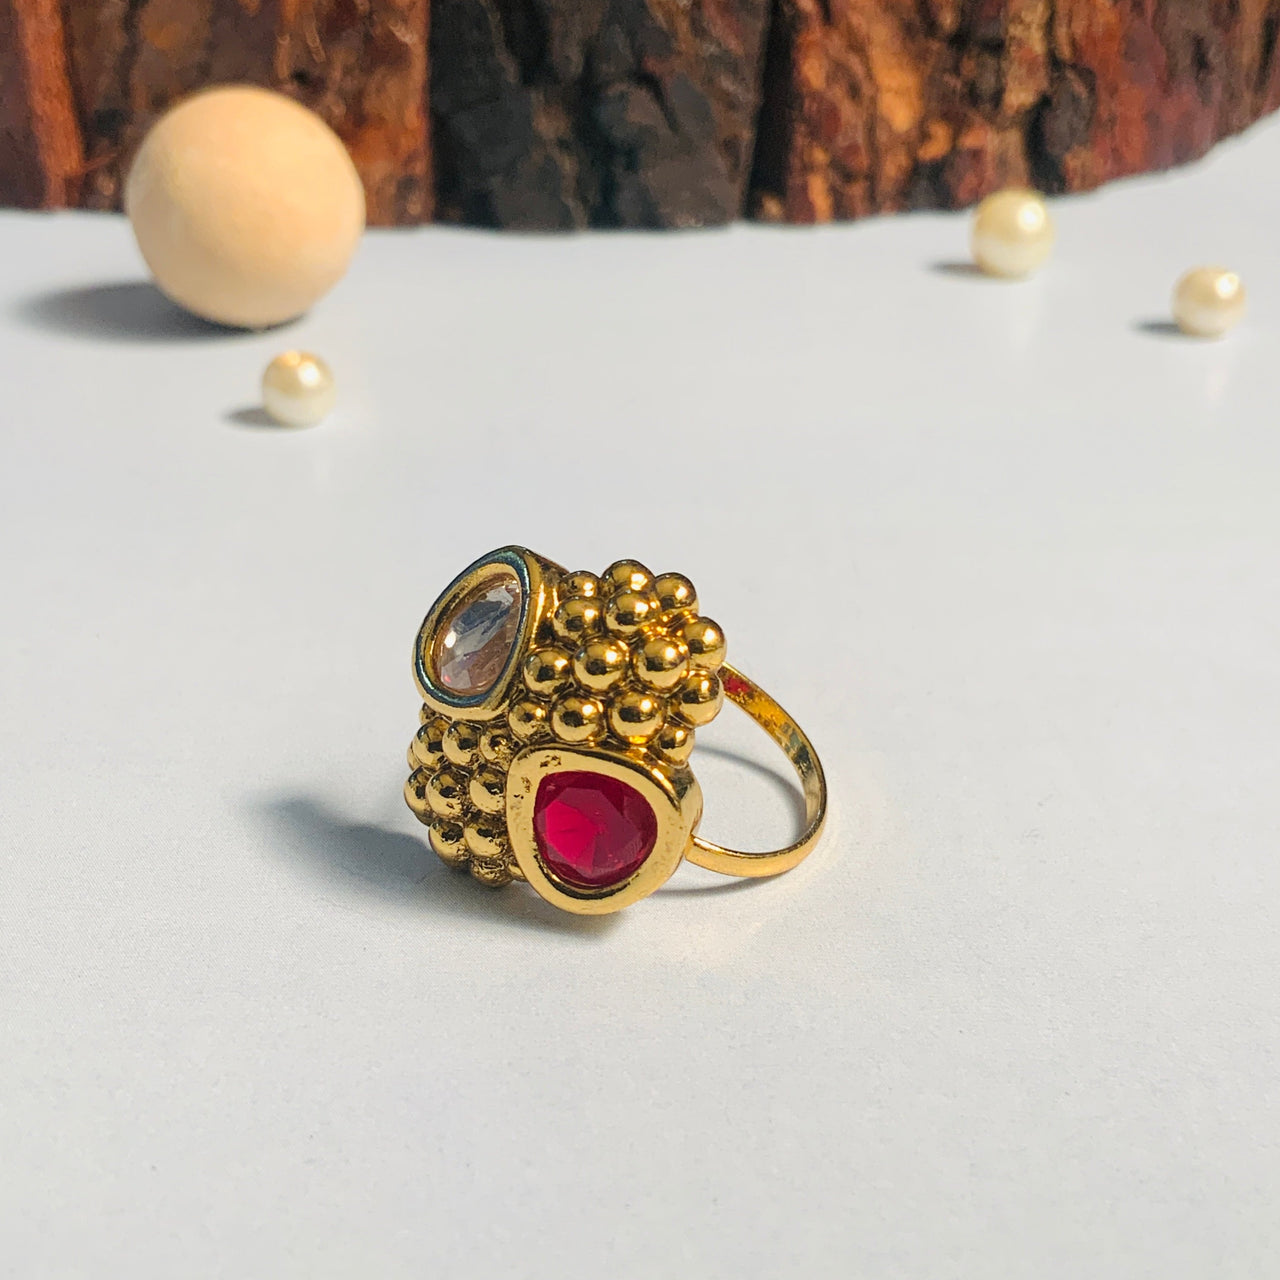 Contemporary High Quality Gold Plated Ring - Abdesignsjewellery